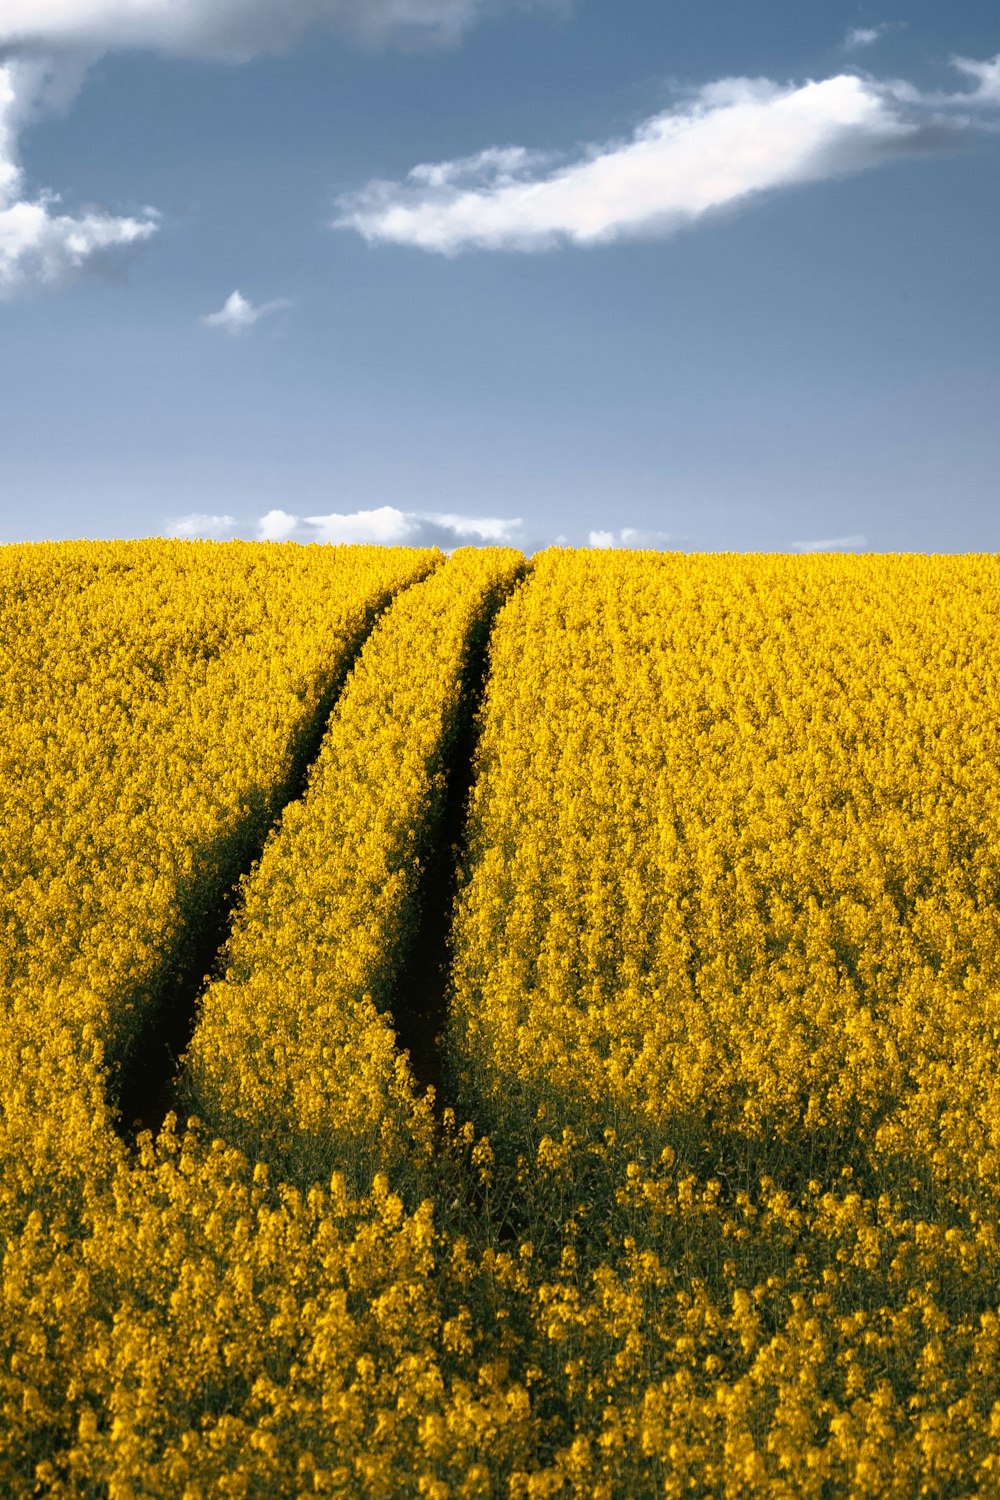 a large field of yellow flowers under a blue sky